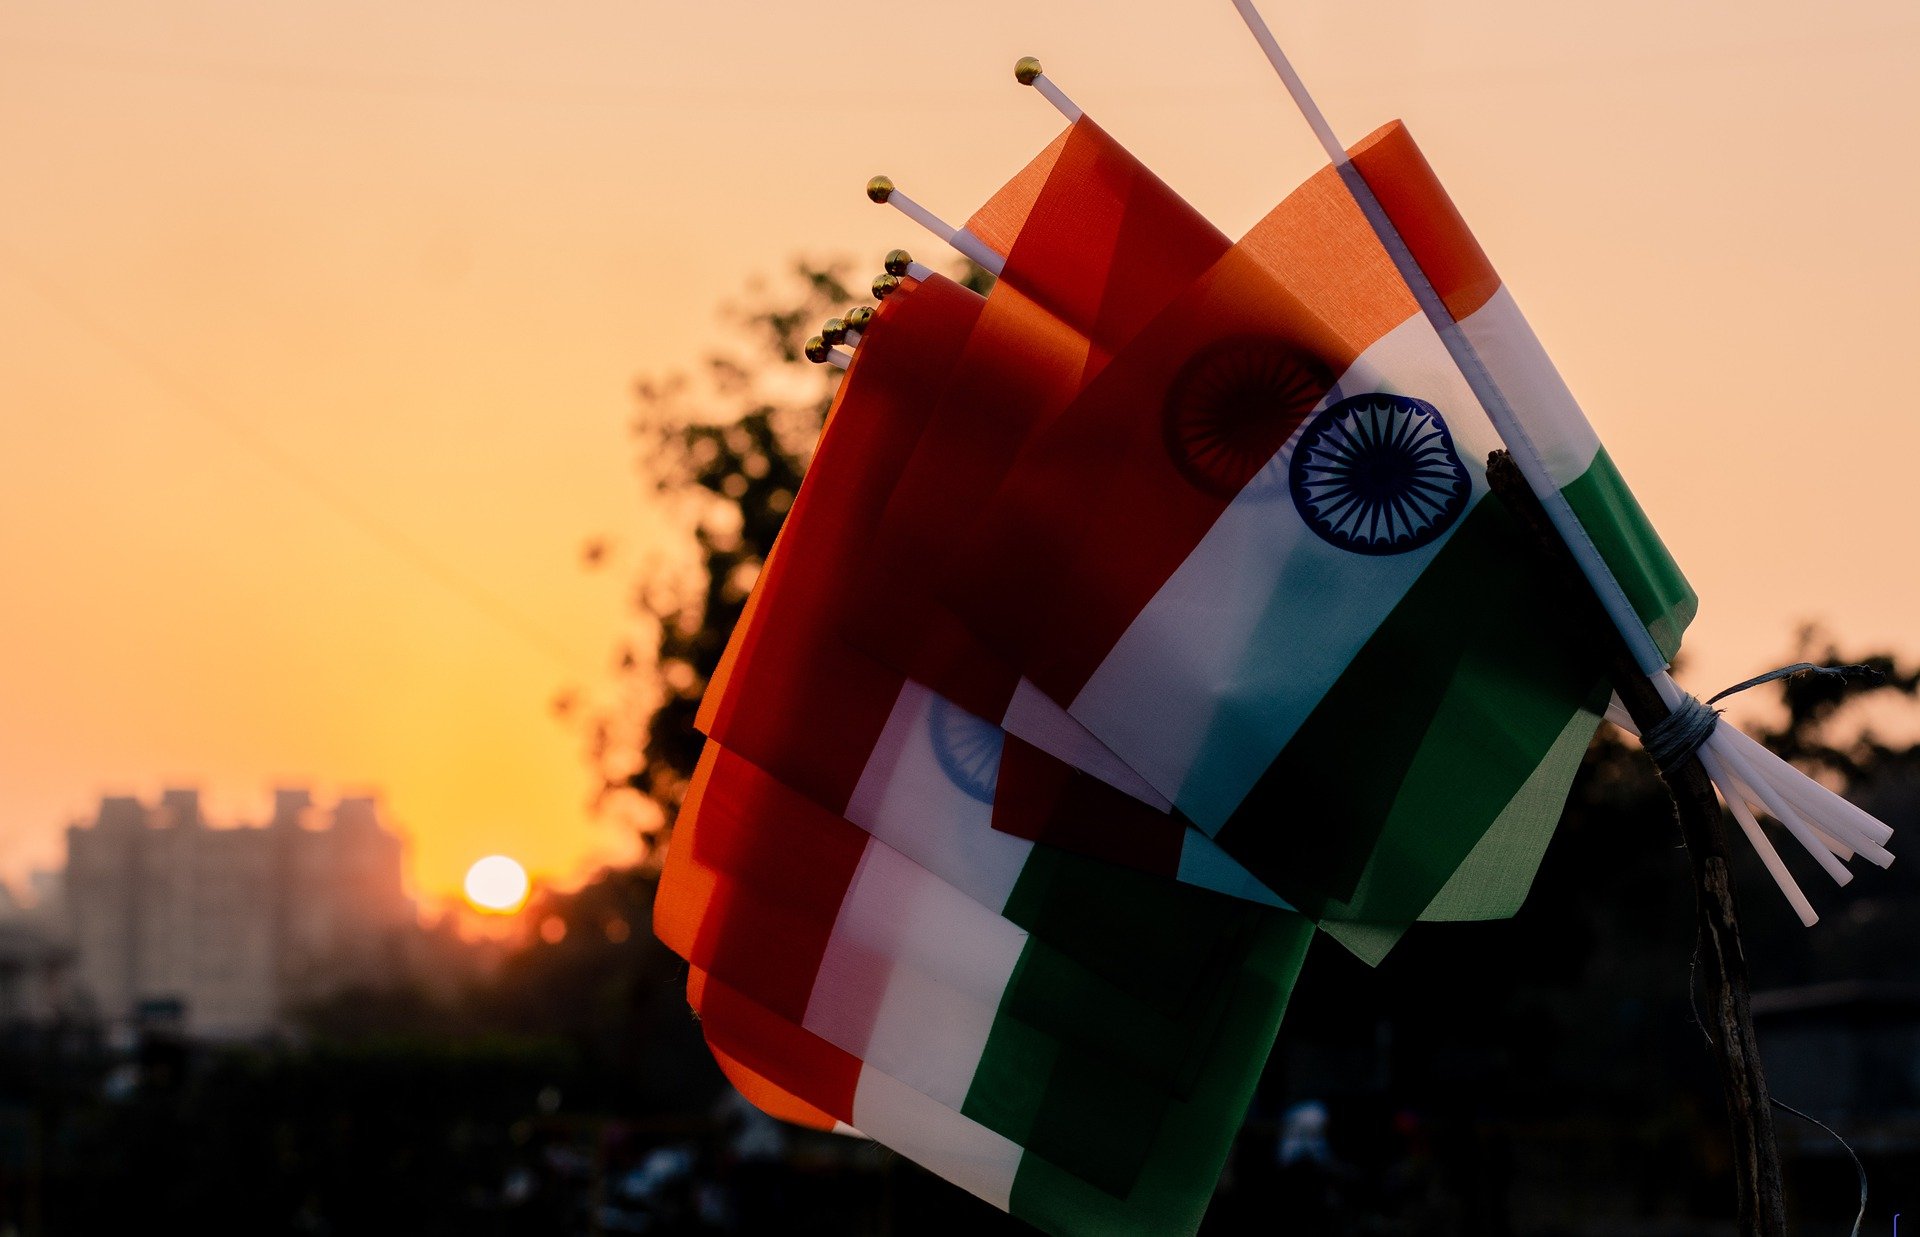 197+ Indian Flag Wallpaper HD Images - Free Download Indian Flag Wallpaper